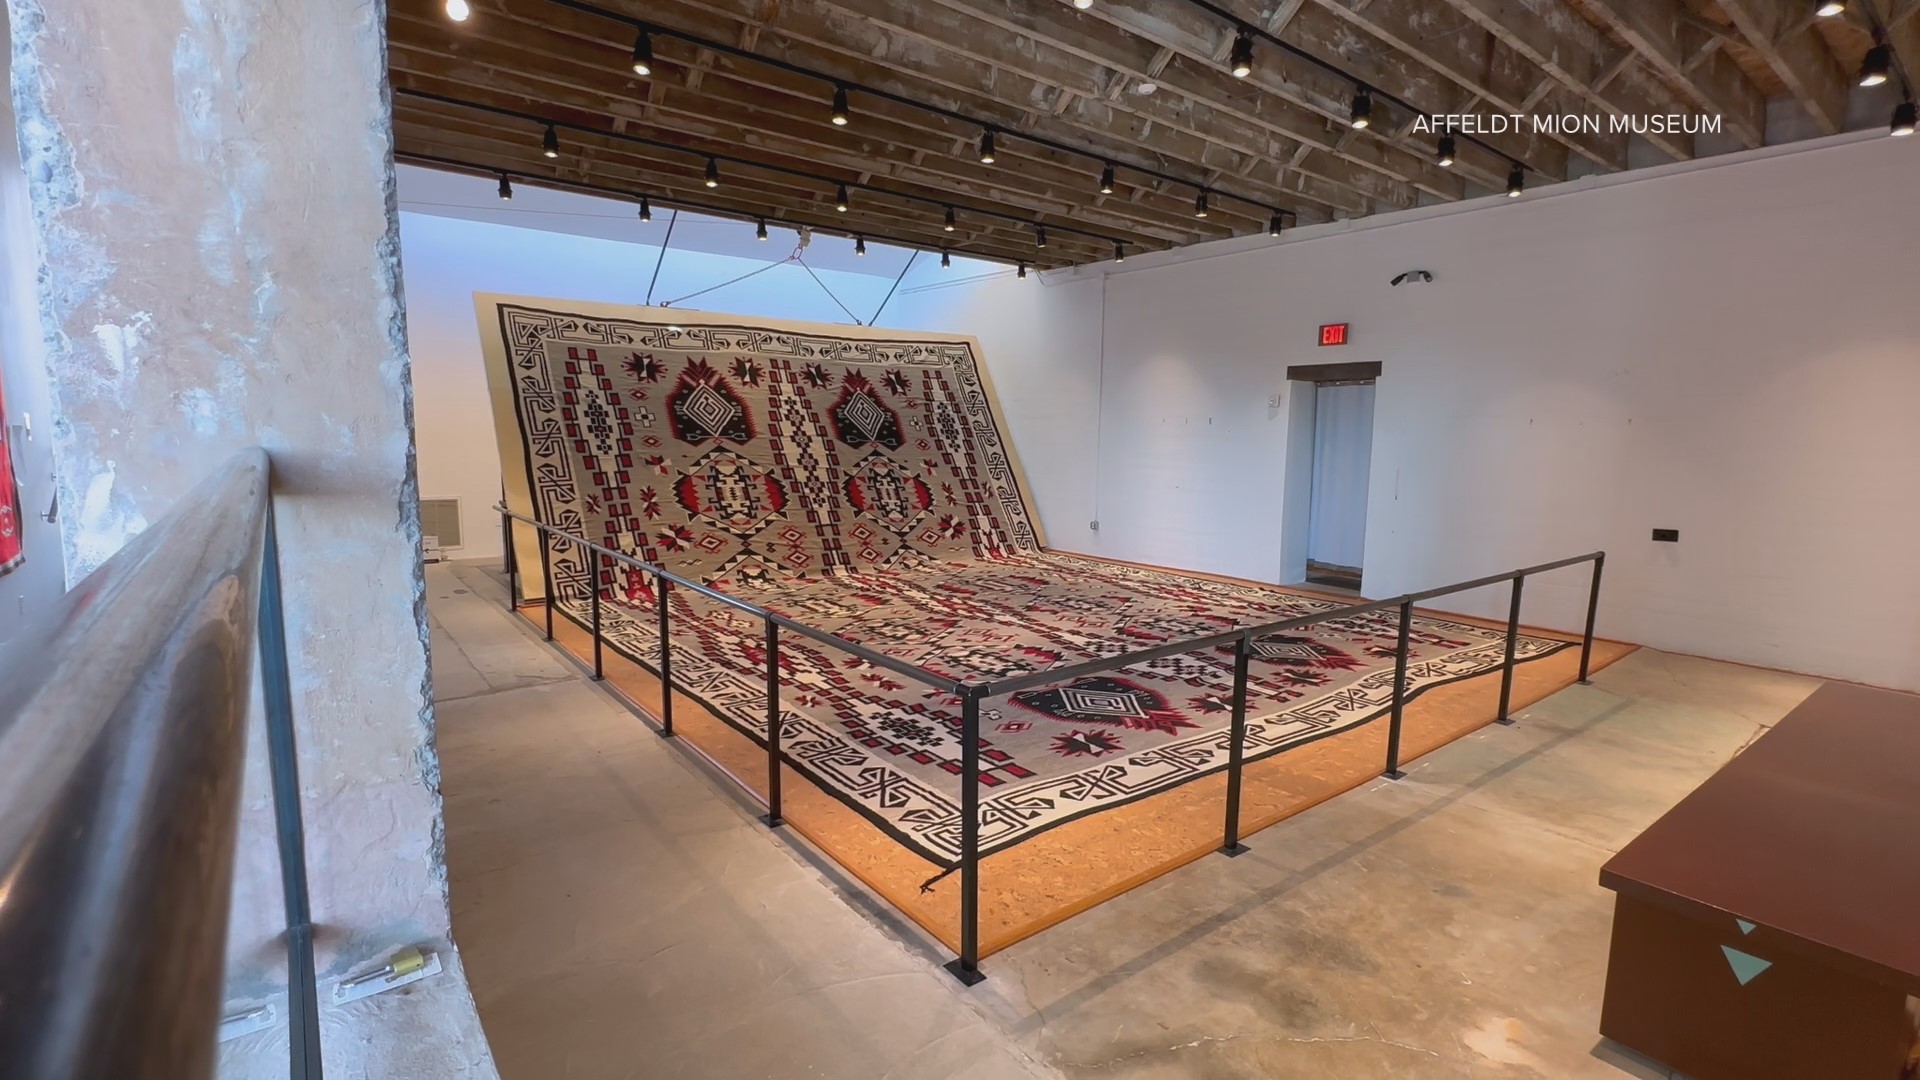 After 40 years hidden in storage, the world's largest Navajo rug has gone on display in Winslow. Museum Director Lori Law shares its history.